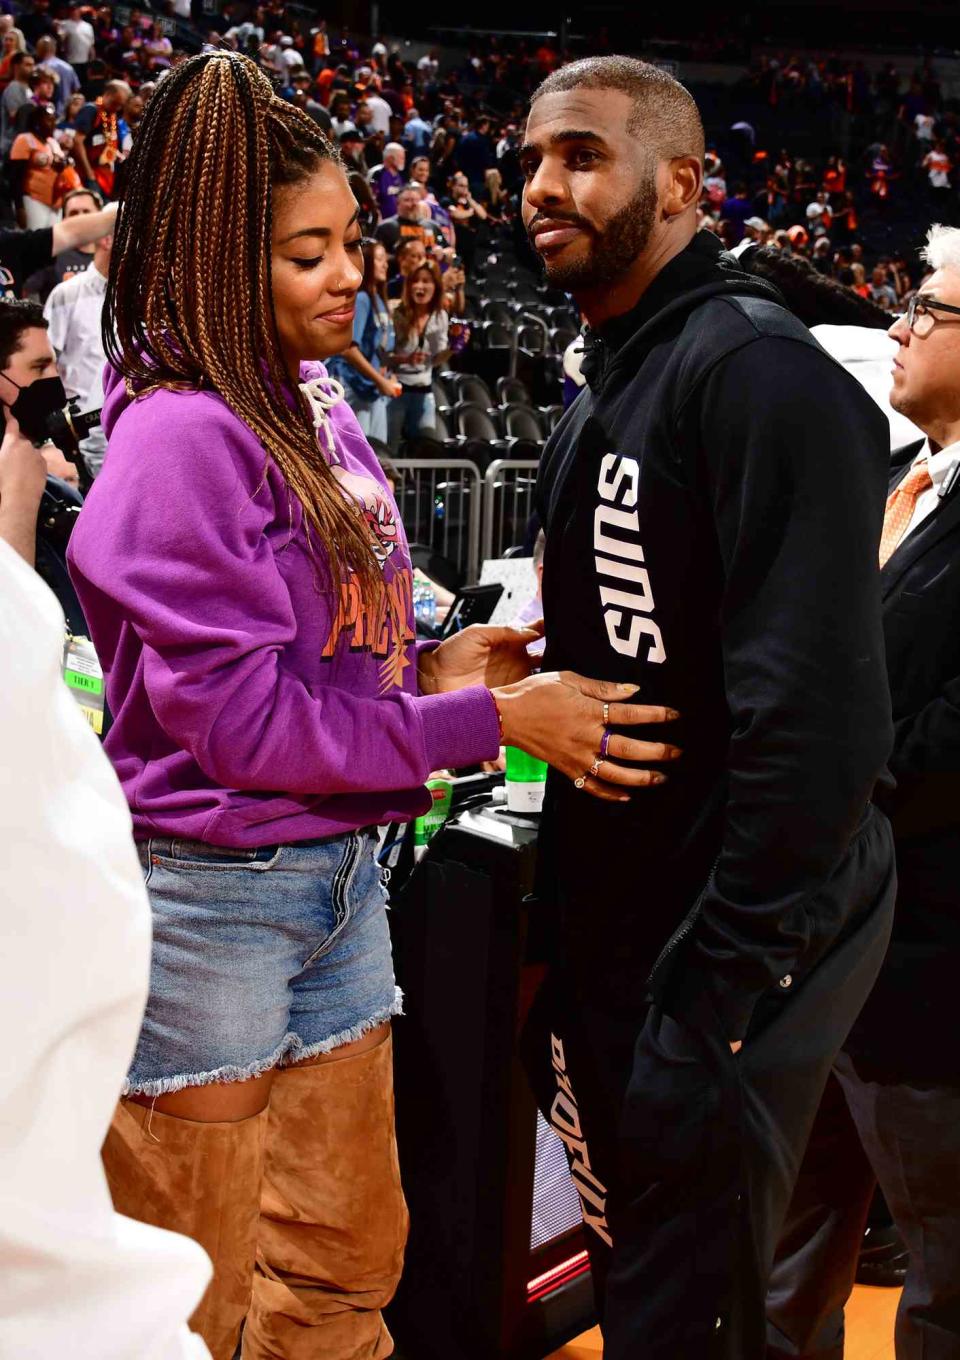 Chris Paul #3 of the Phoenix Suns and his wife Jada Paul embrace after the game during Game 2 of the 2022 NBA Playoffs Western Conference Semifinals on May 4, 2022 at Footprint Center in Phoenix, Arizona